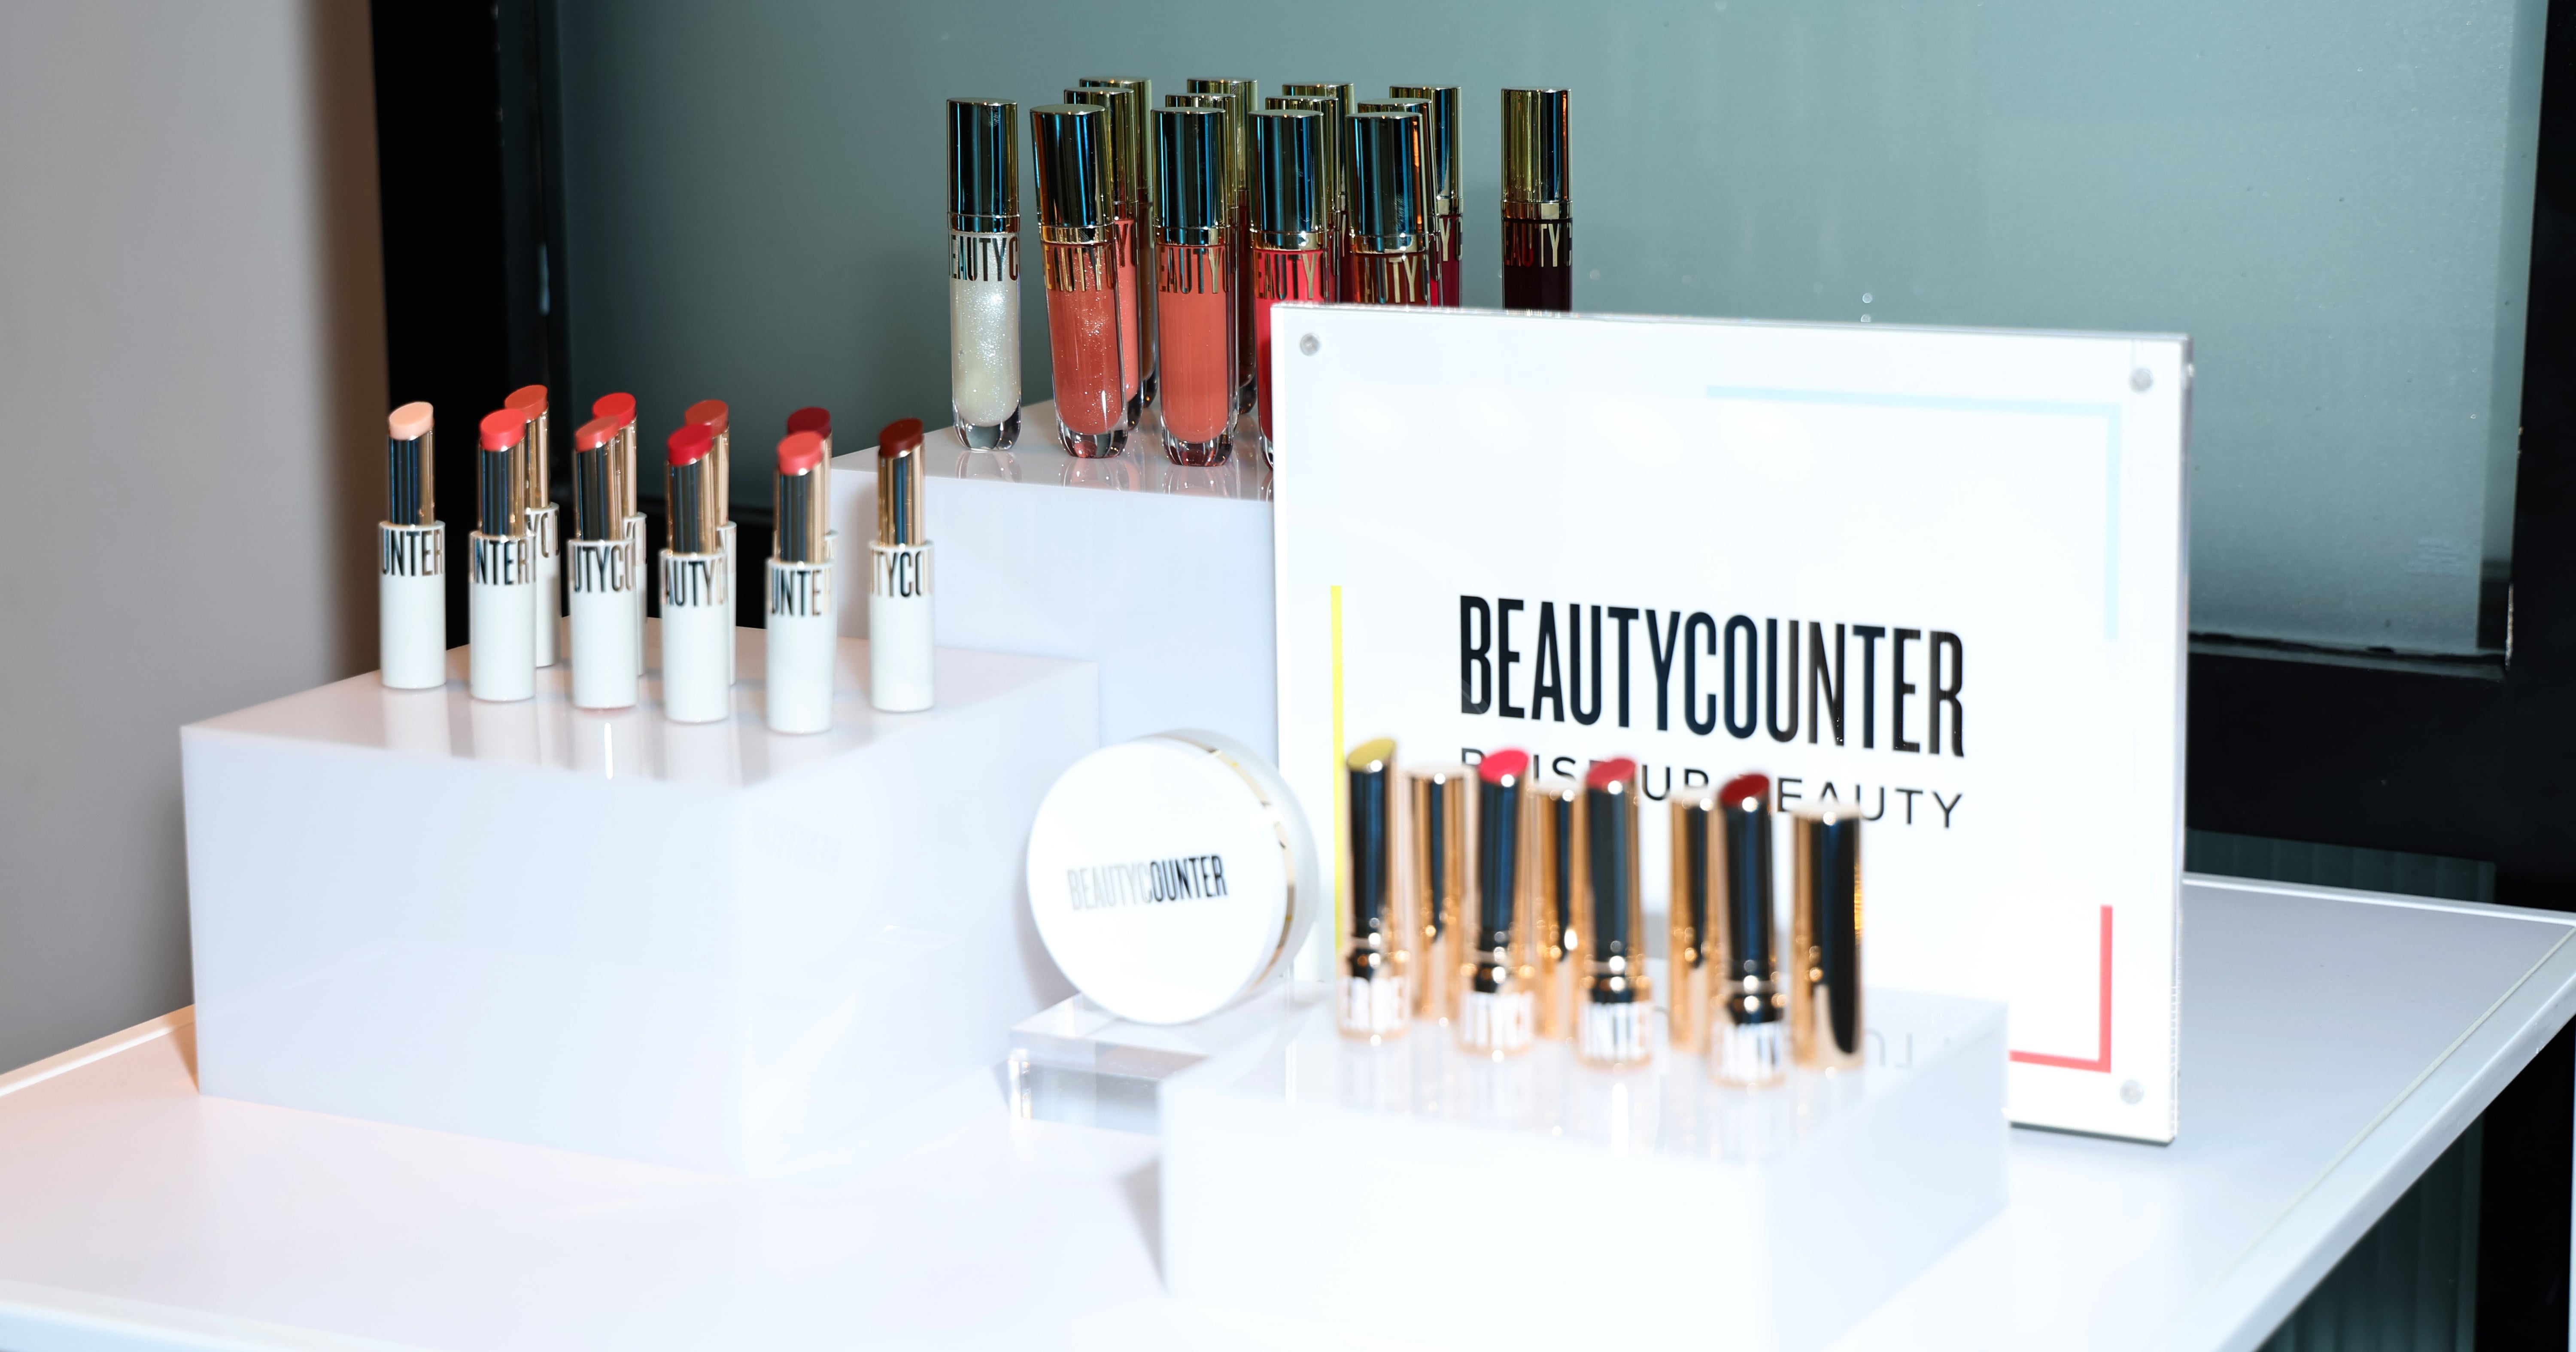 What’s Going On With BeautyCounter?